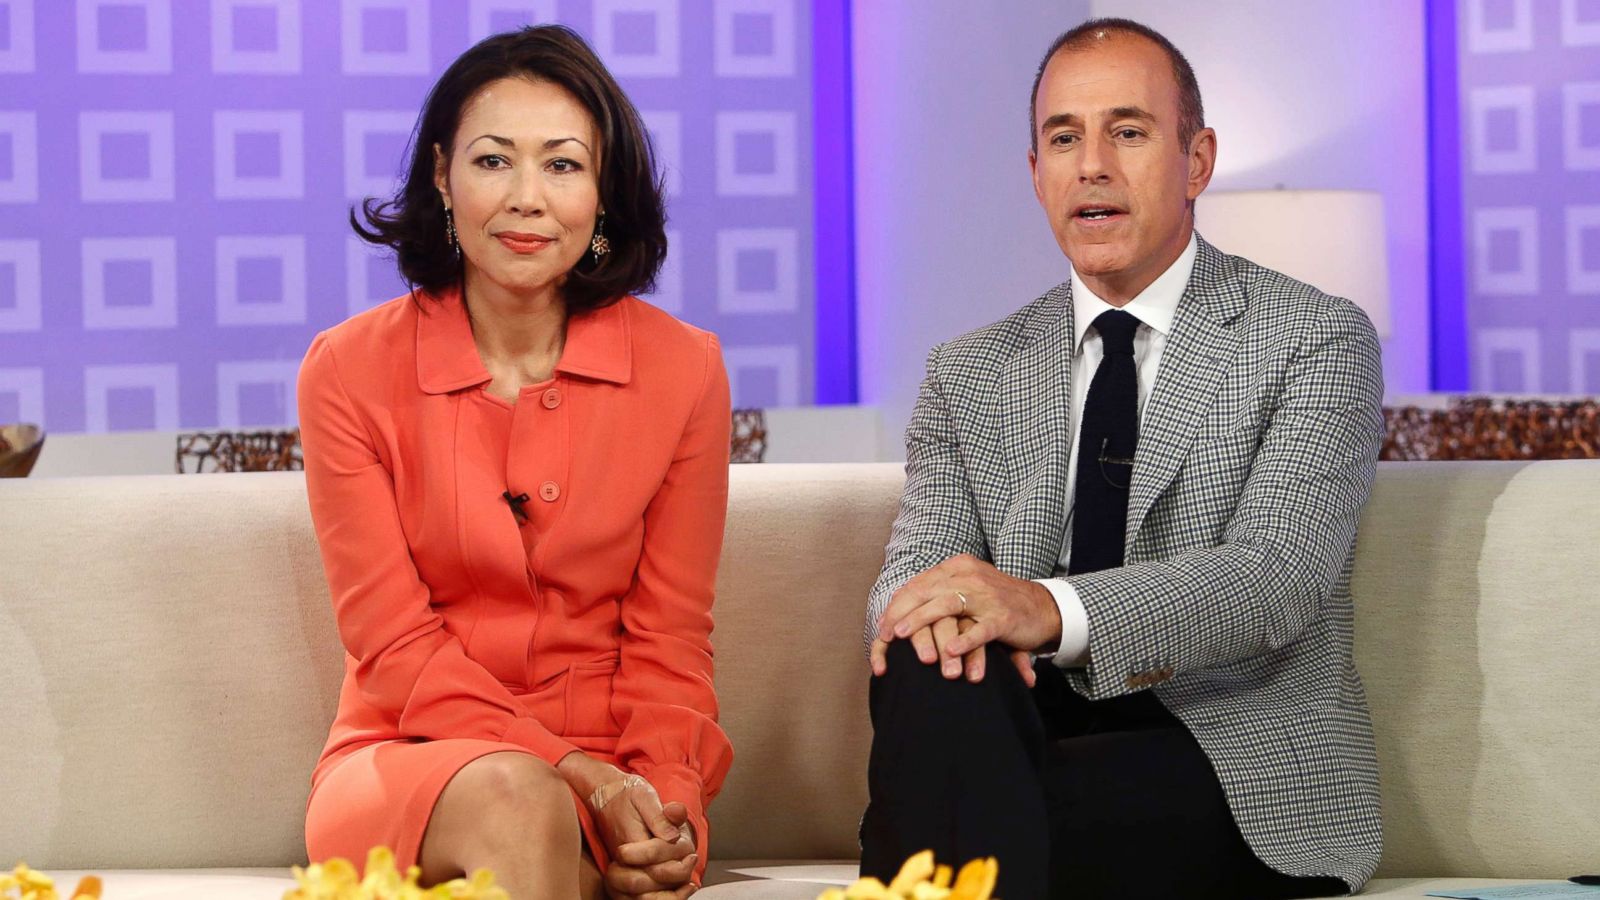 Ann Curry Having Sex - Ann Curry speaks out about Matt Lauer: 'I am not surprised by the  allegations' - ABC News